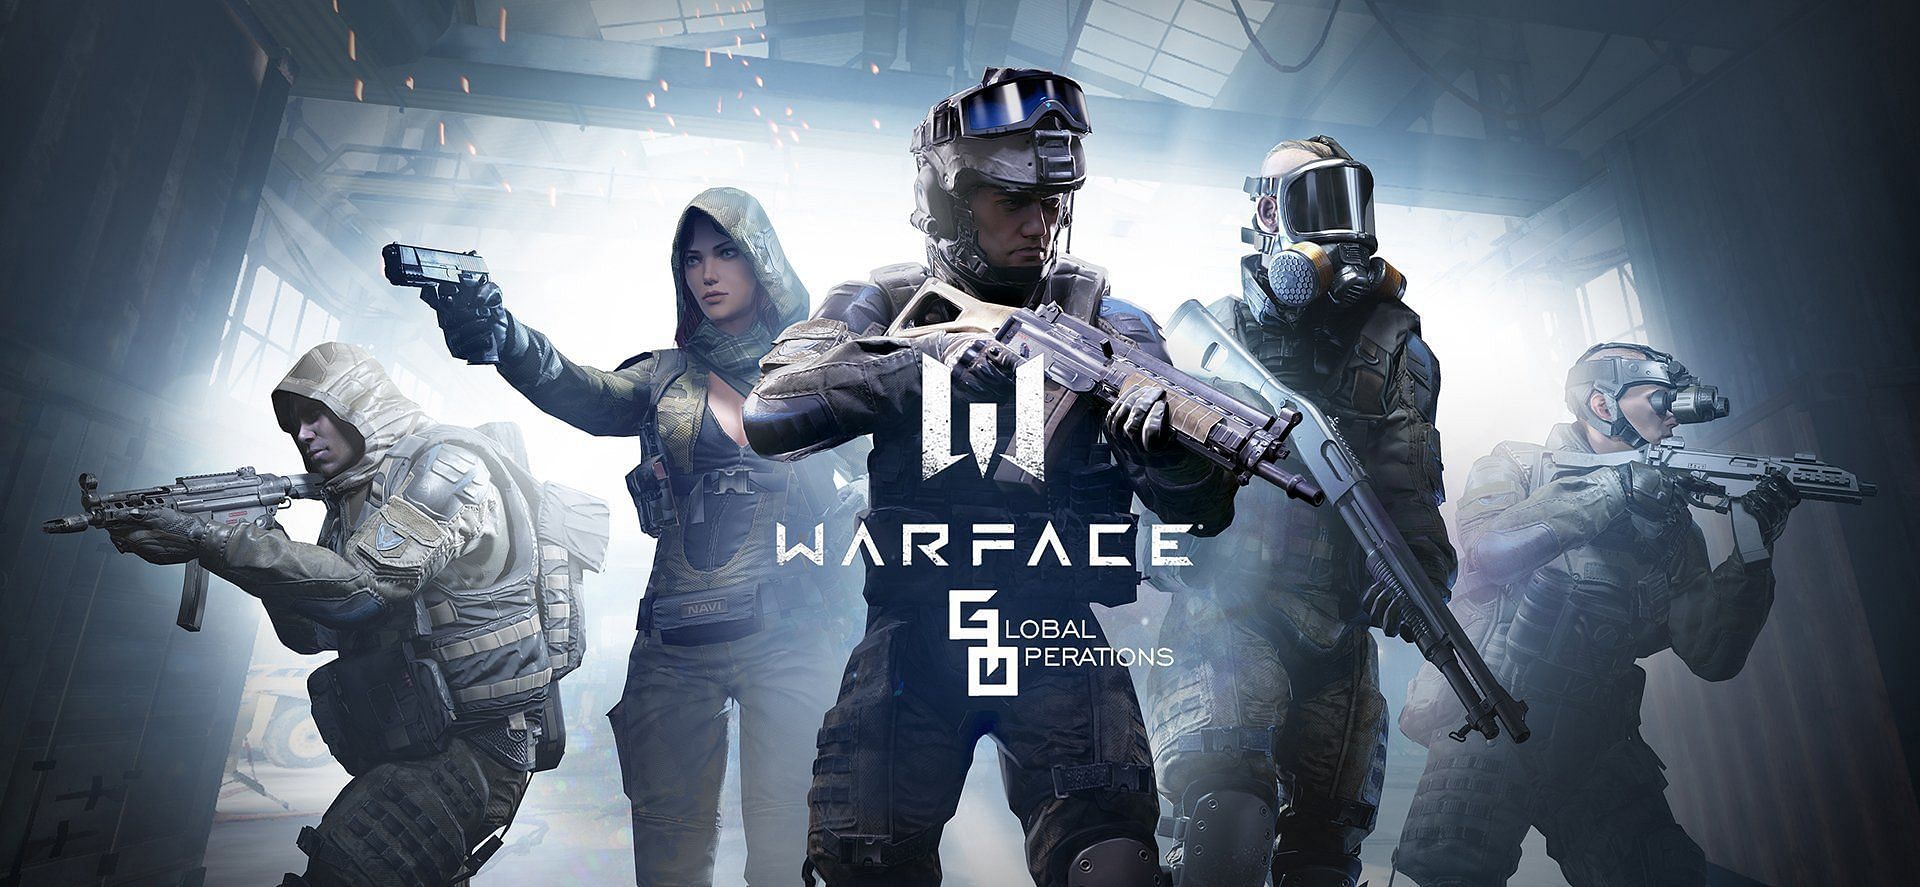 Warface: Global Operations game (Image via My Games)